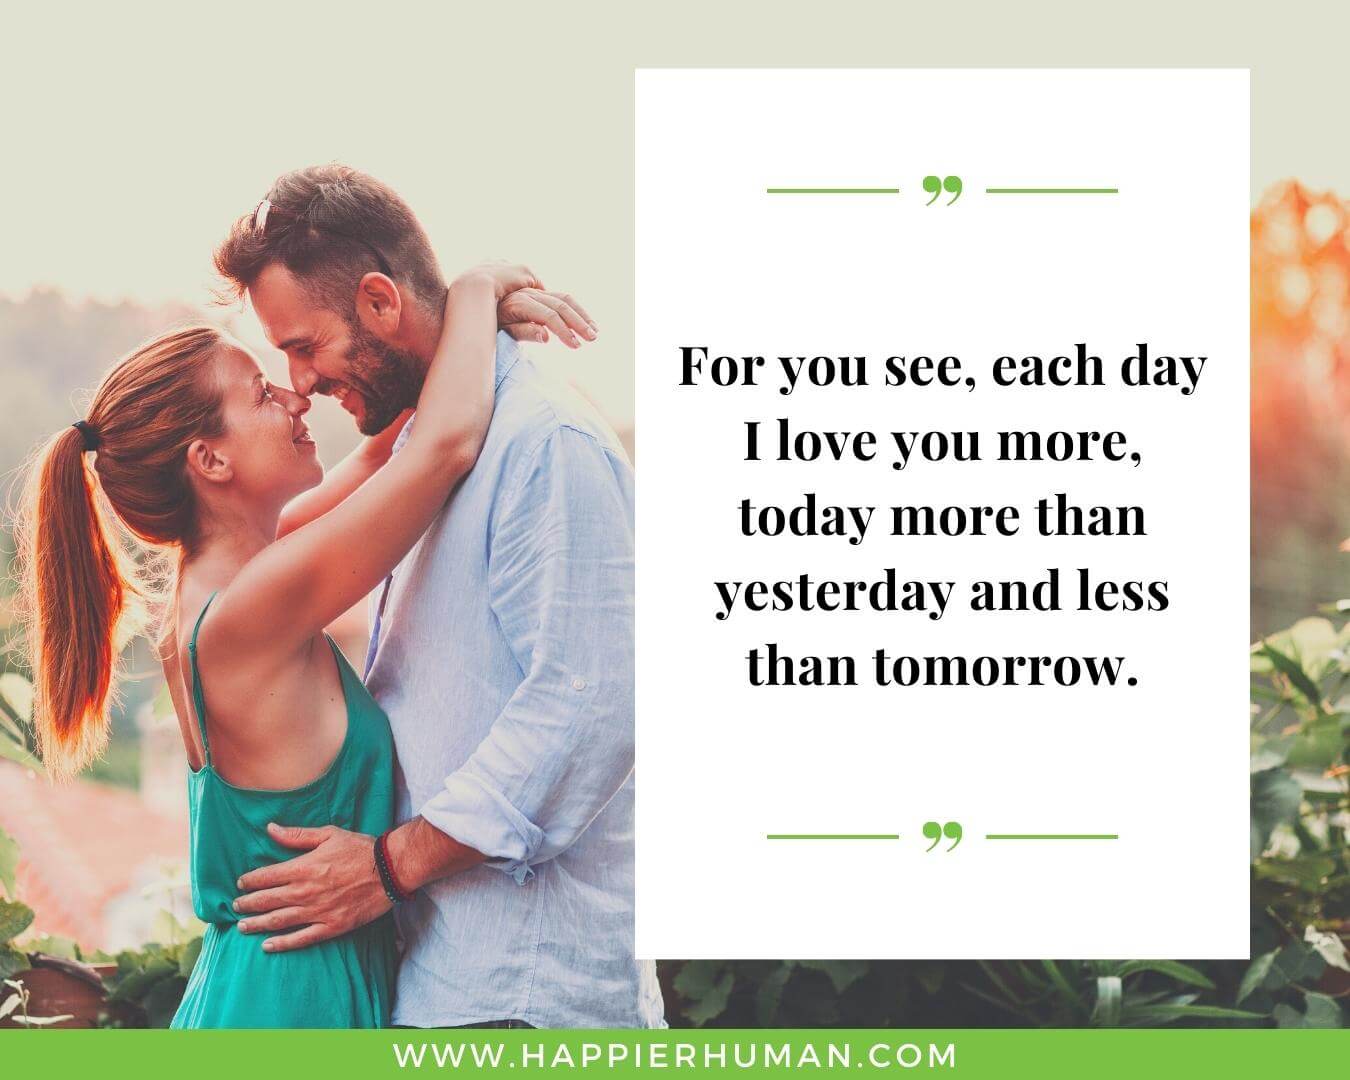 Unconditional Love Quotes for Her - “For you see, each day I love you more, today more than yesterday and less than tomorrow.”